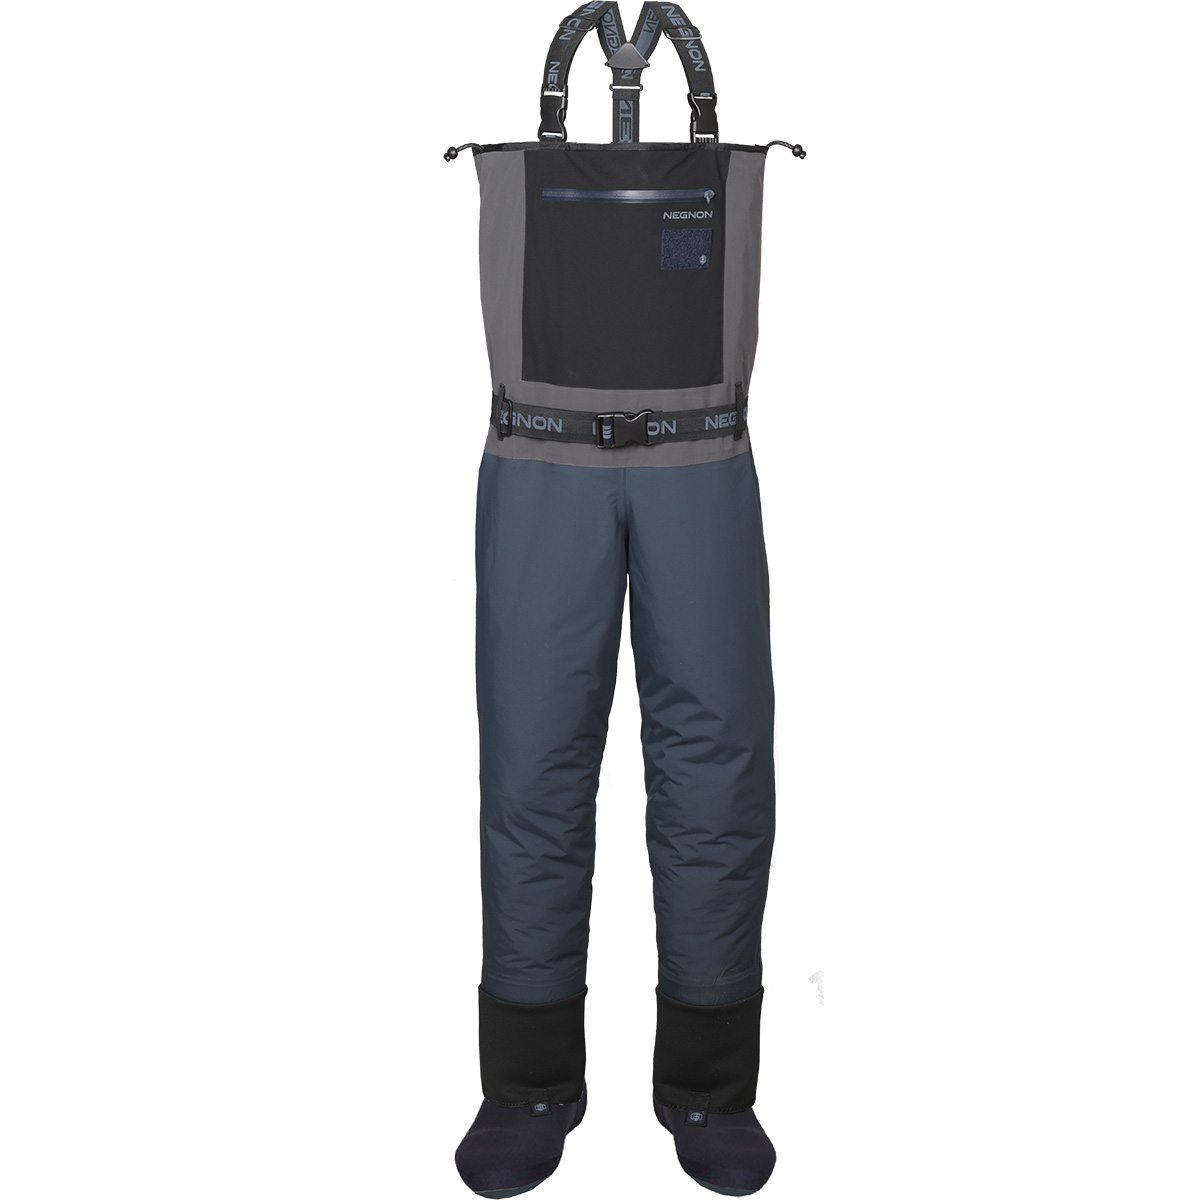 Negnon Omega Velorum Waders, Fishing waders - Chest, Hip and Pants